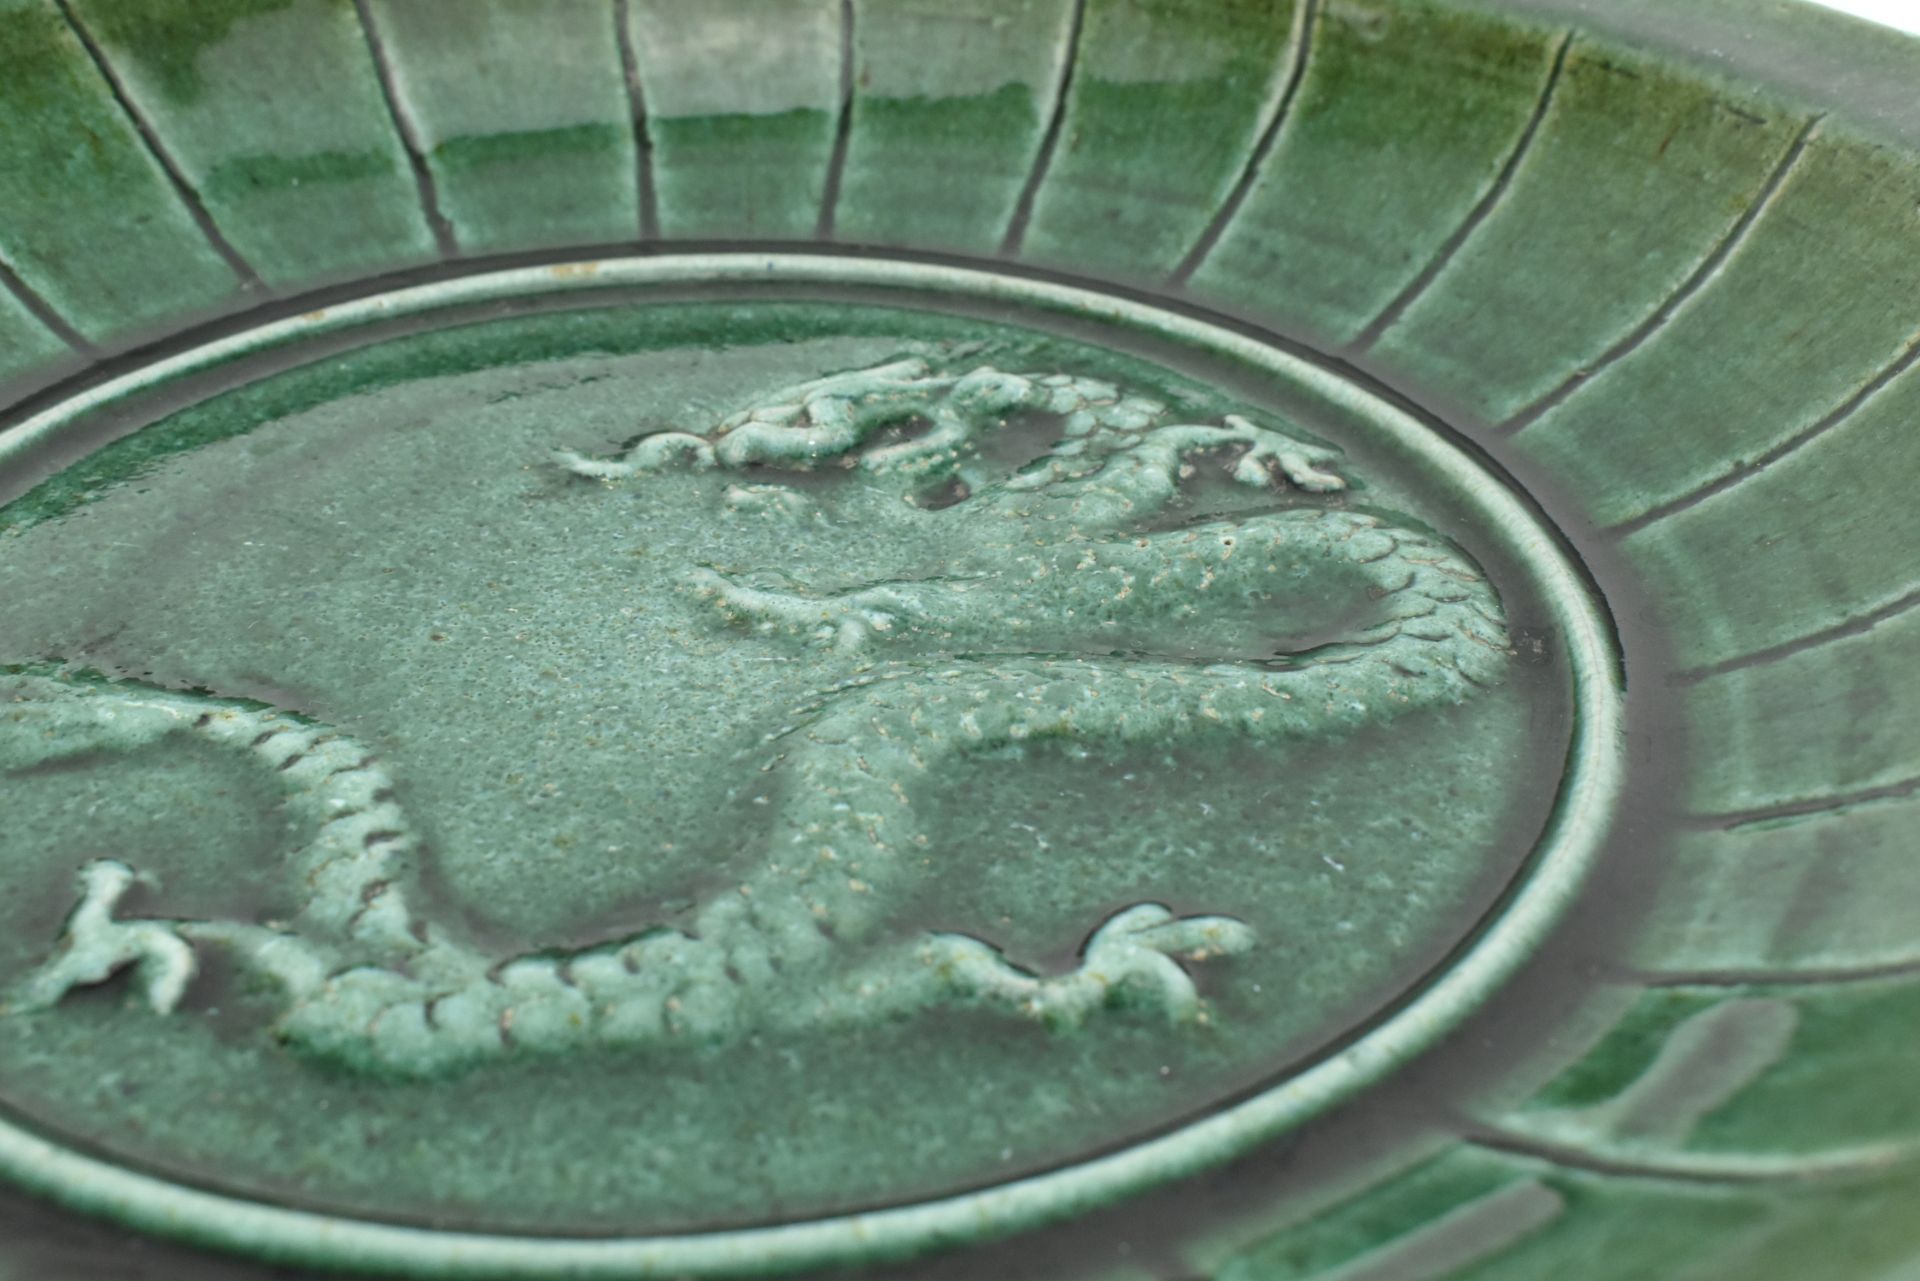 STONEWARE GREEN GLAZED "DRAGON" RELIEF CHARGER 绿釉三爪龙浮雕盘 - Image 5 of 6